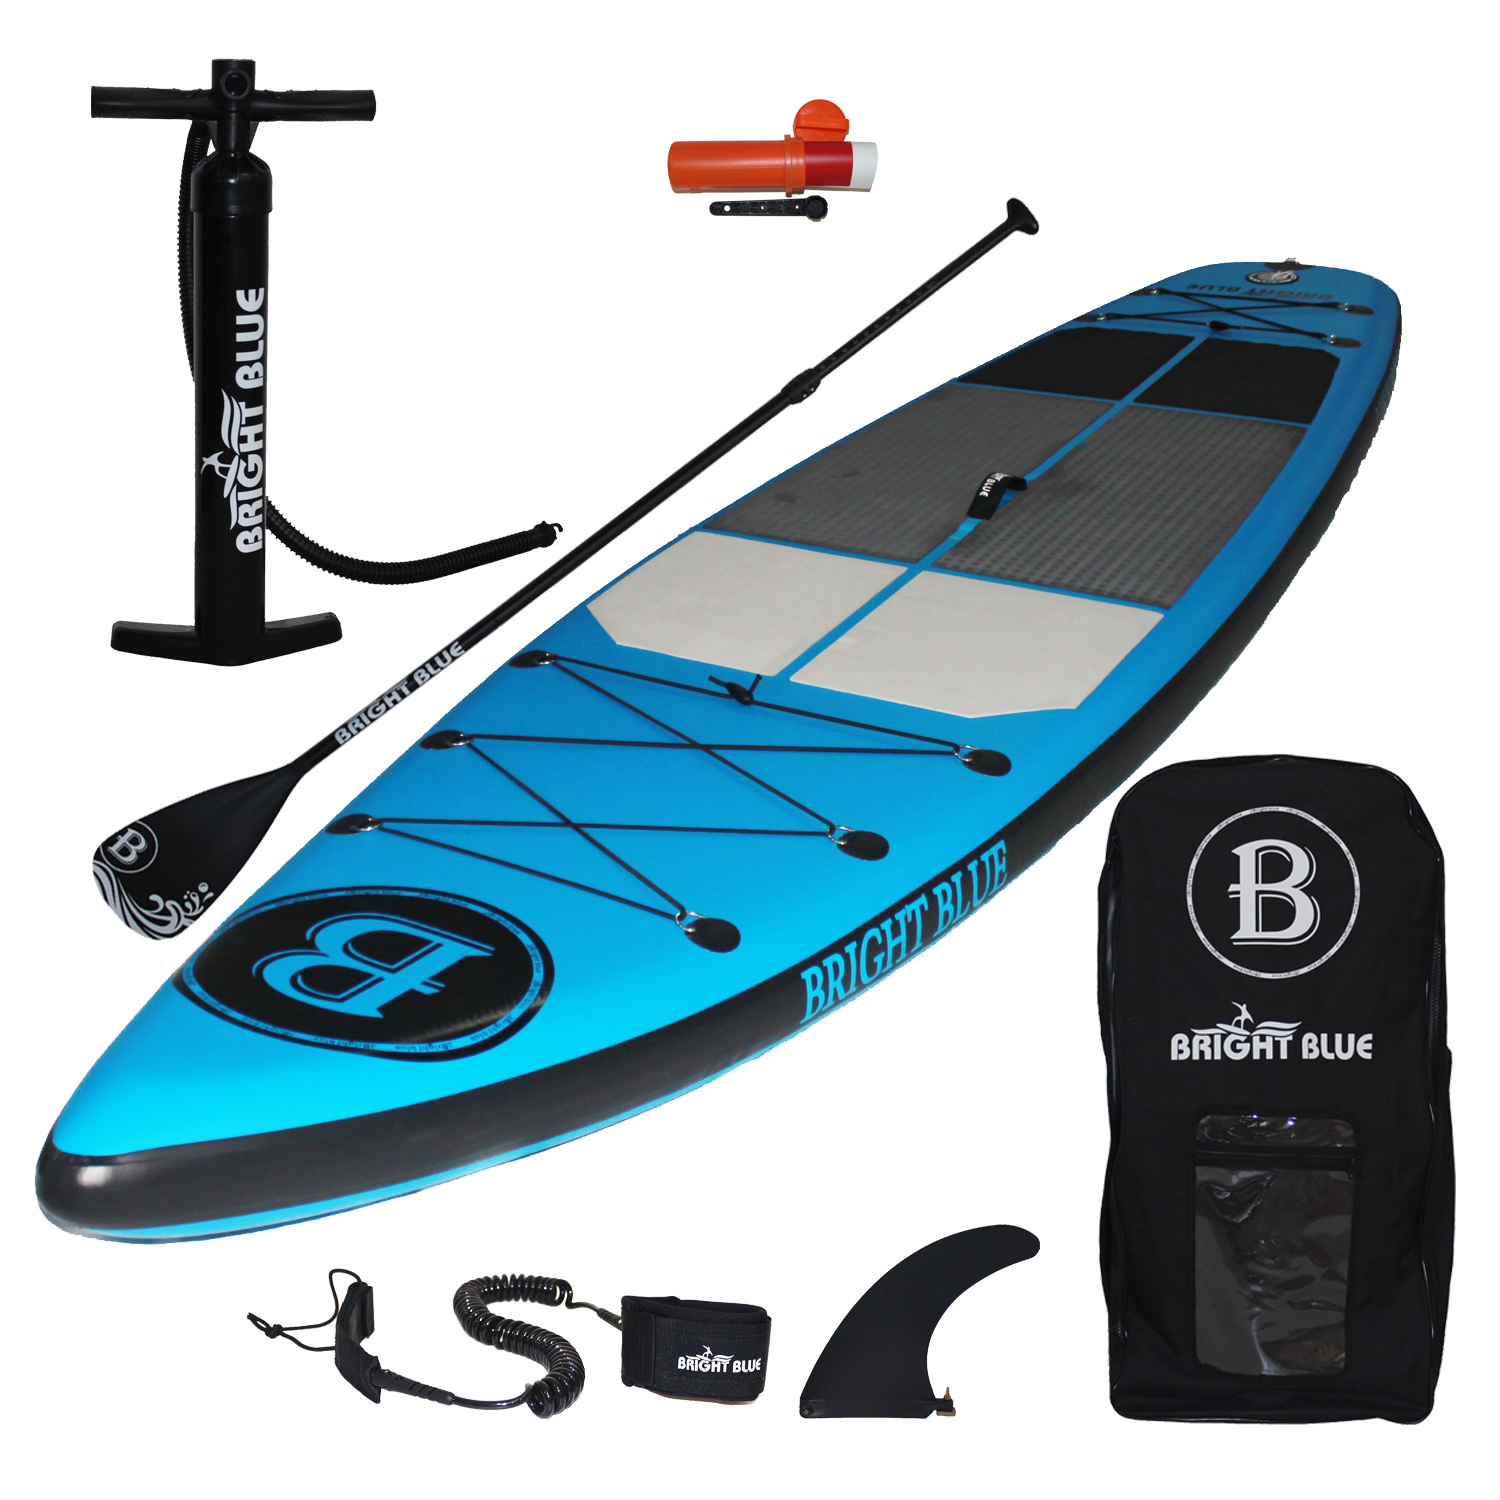 US 549.99 BRIGHT BLUE Fusion All Round Inflatable Stand Up Paddle